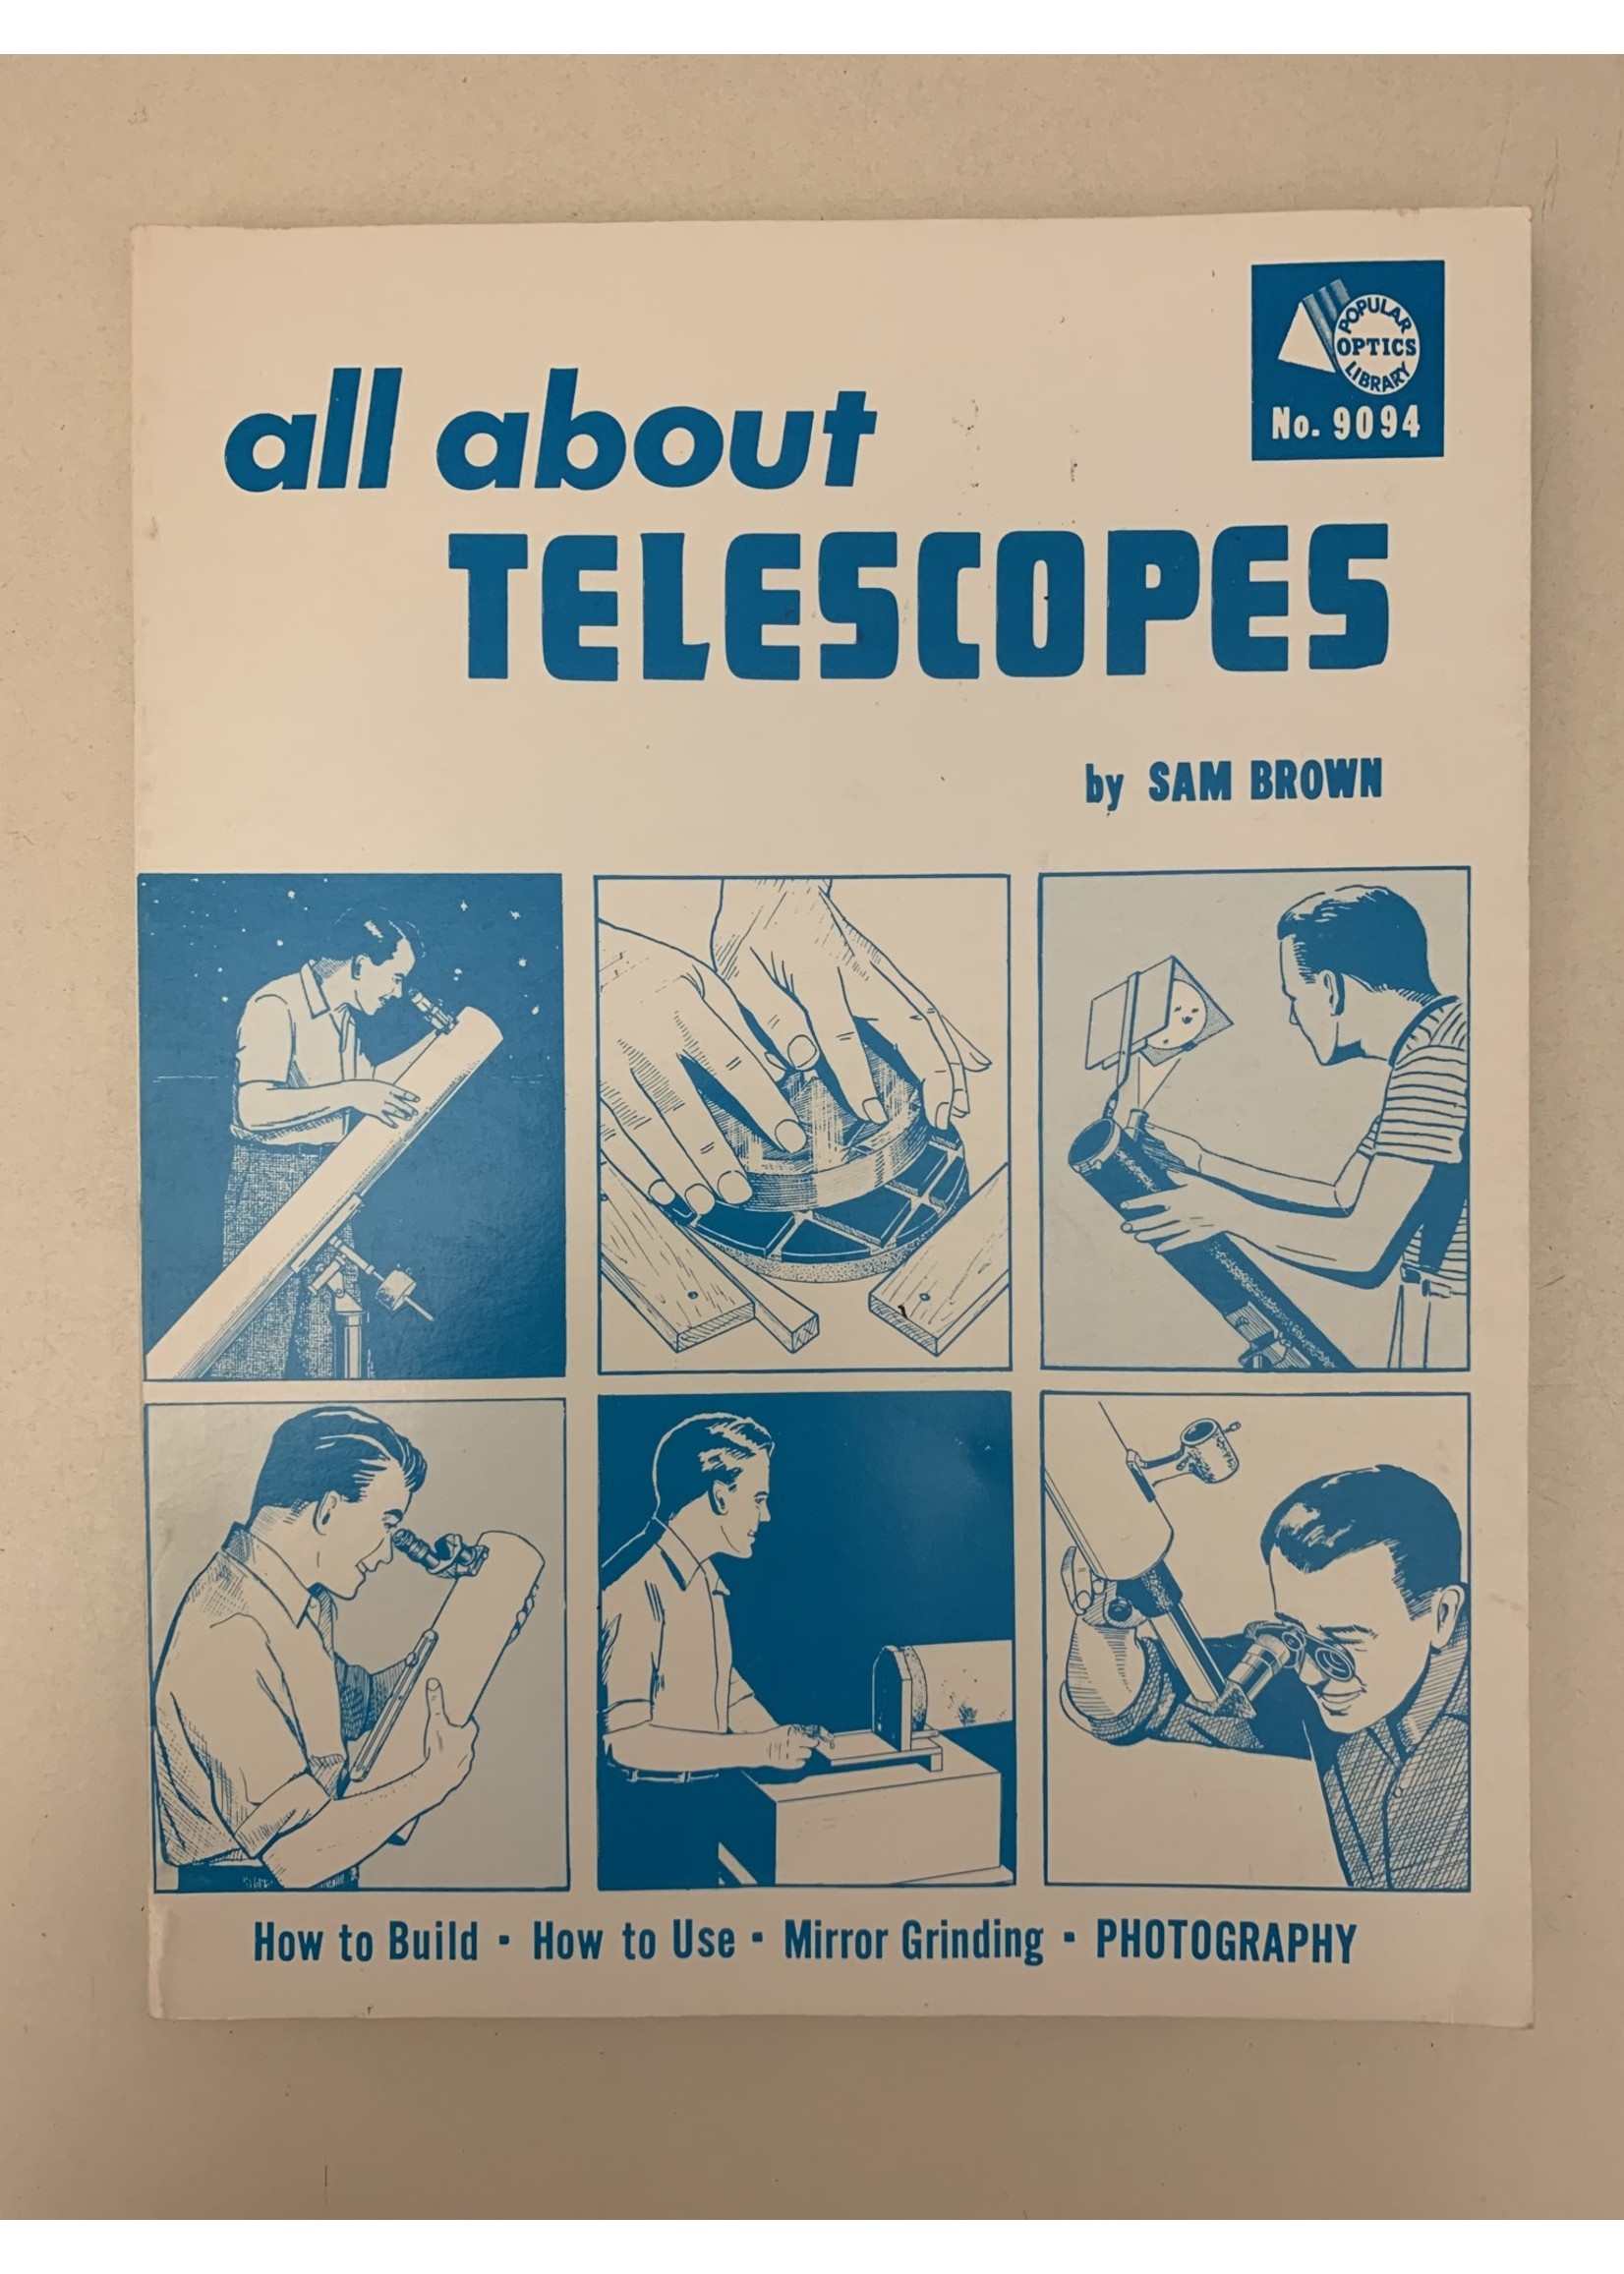 All About Telescopes by Sam Brown